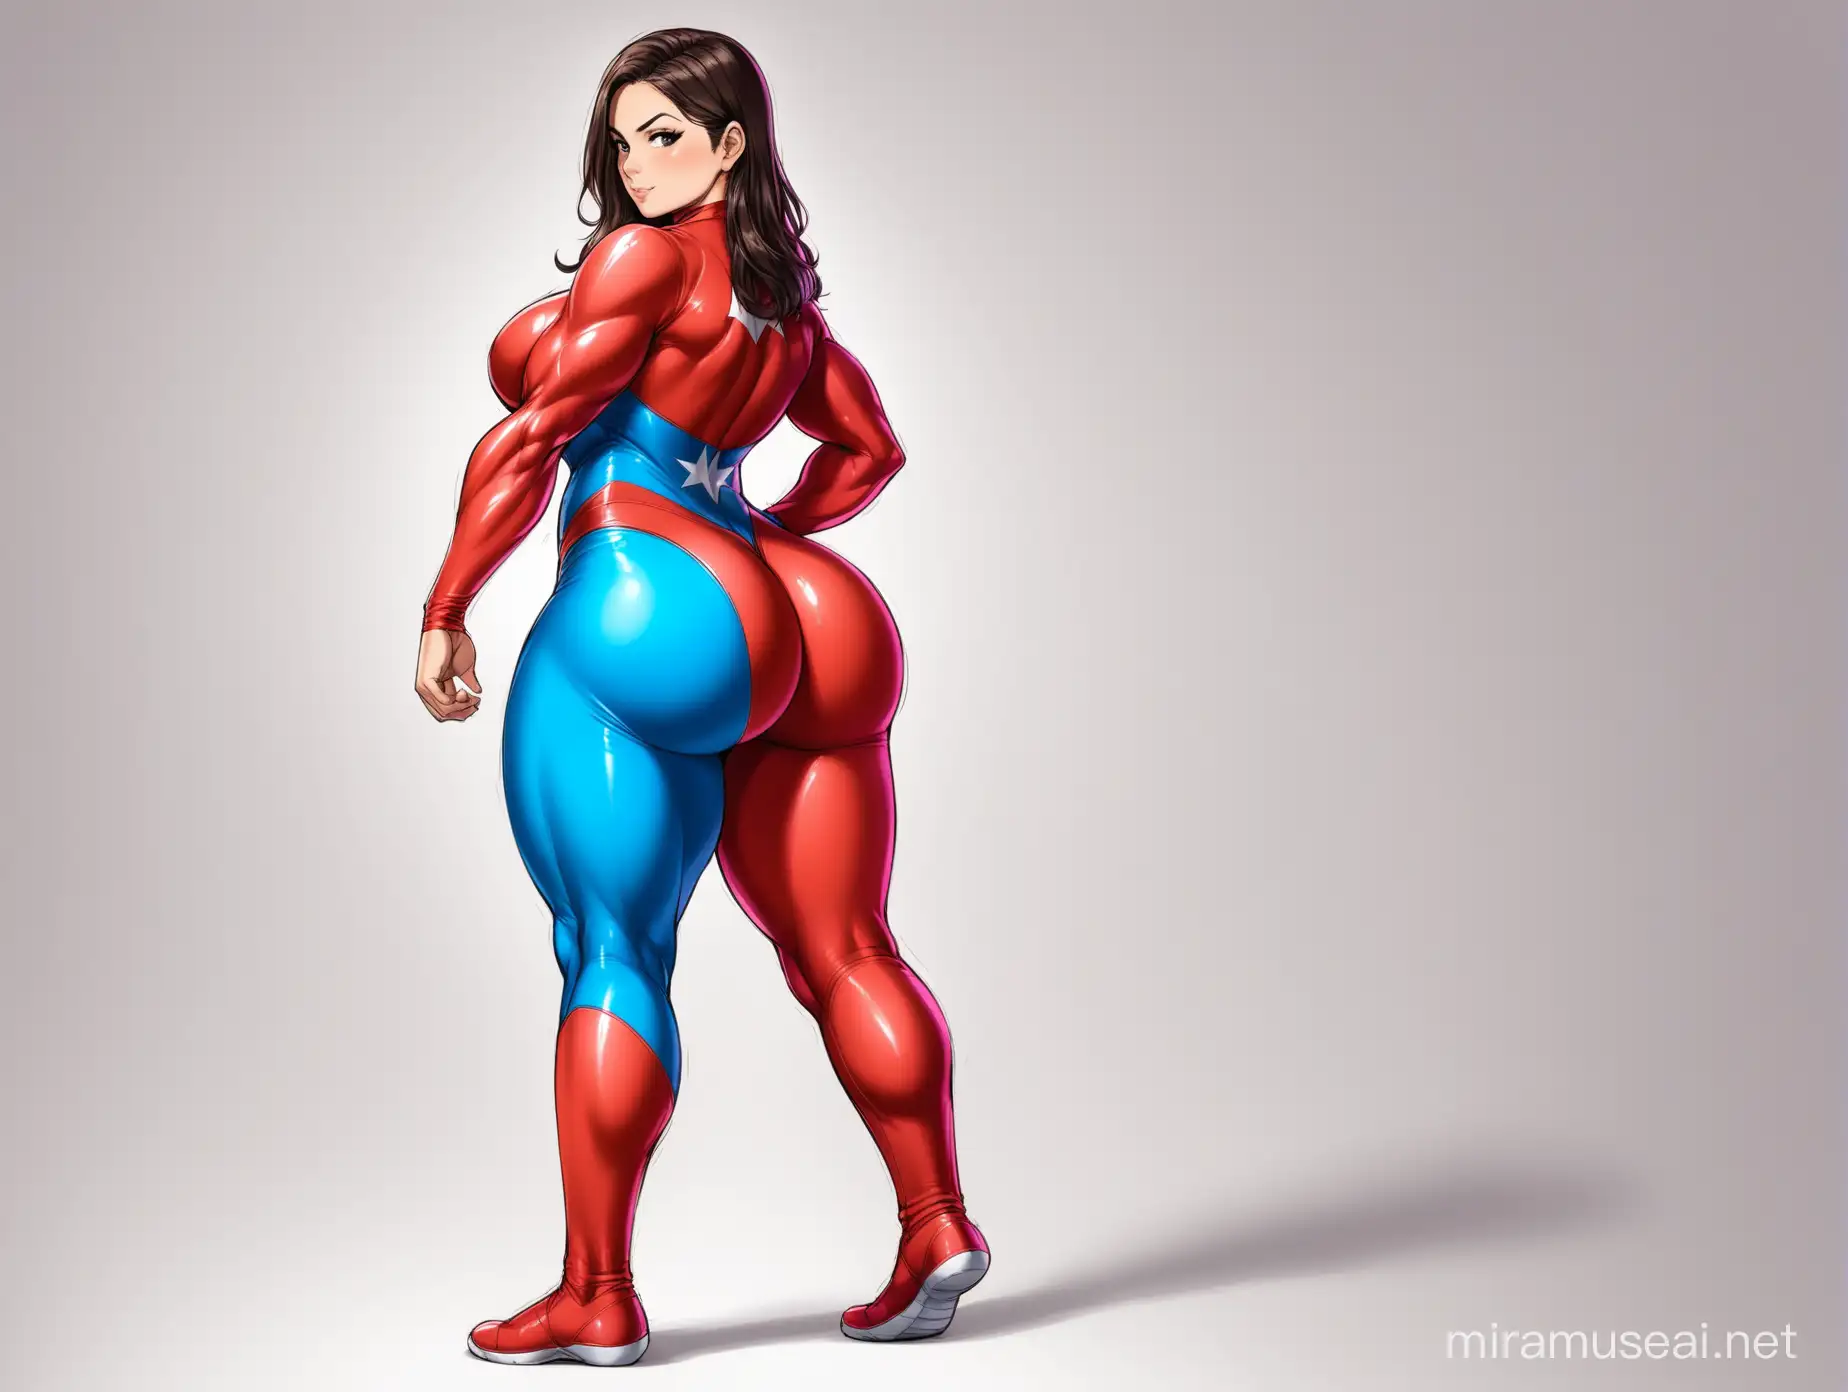 a chilean woman, brunette, superhero, tight suit, colors, huge booty, bubble booty, fake ass, strong legs, stuffed thighs, strong legs, white background, full body.